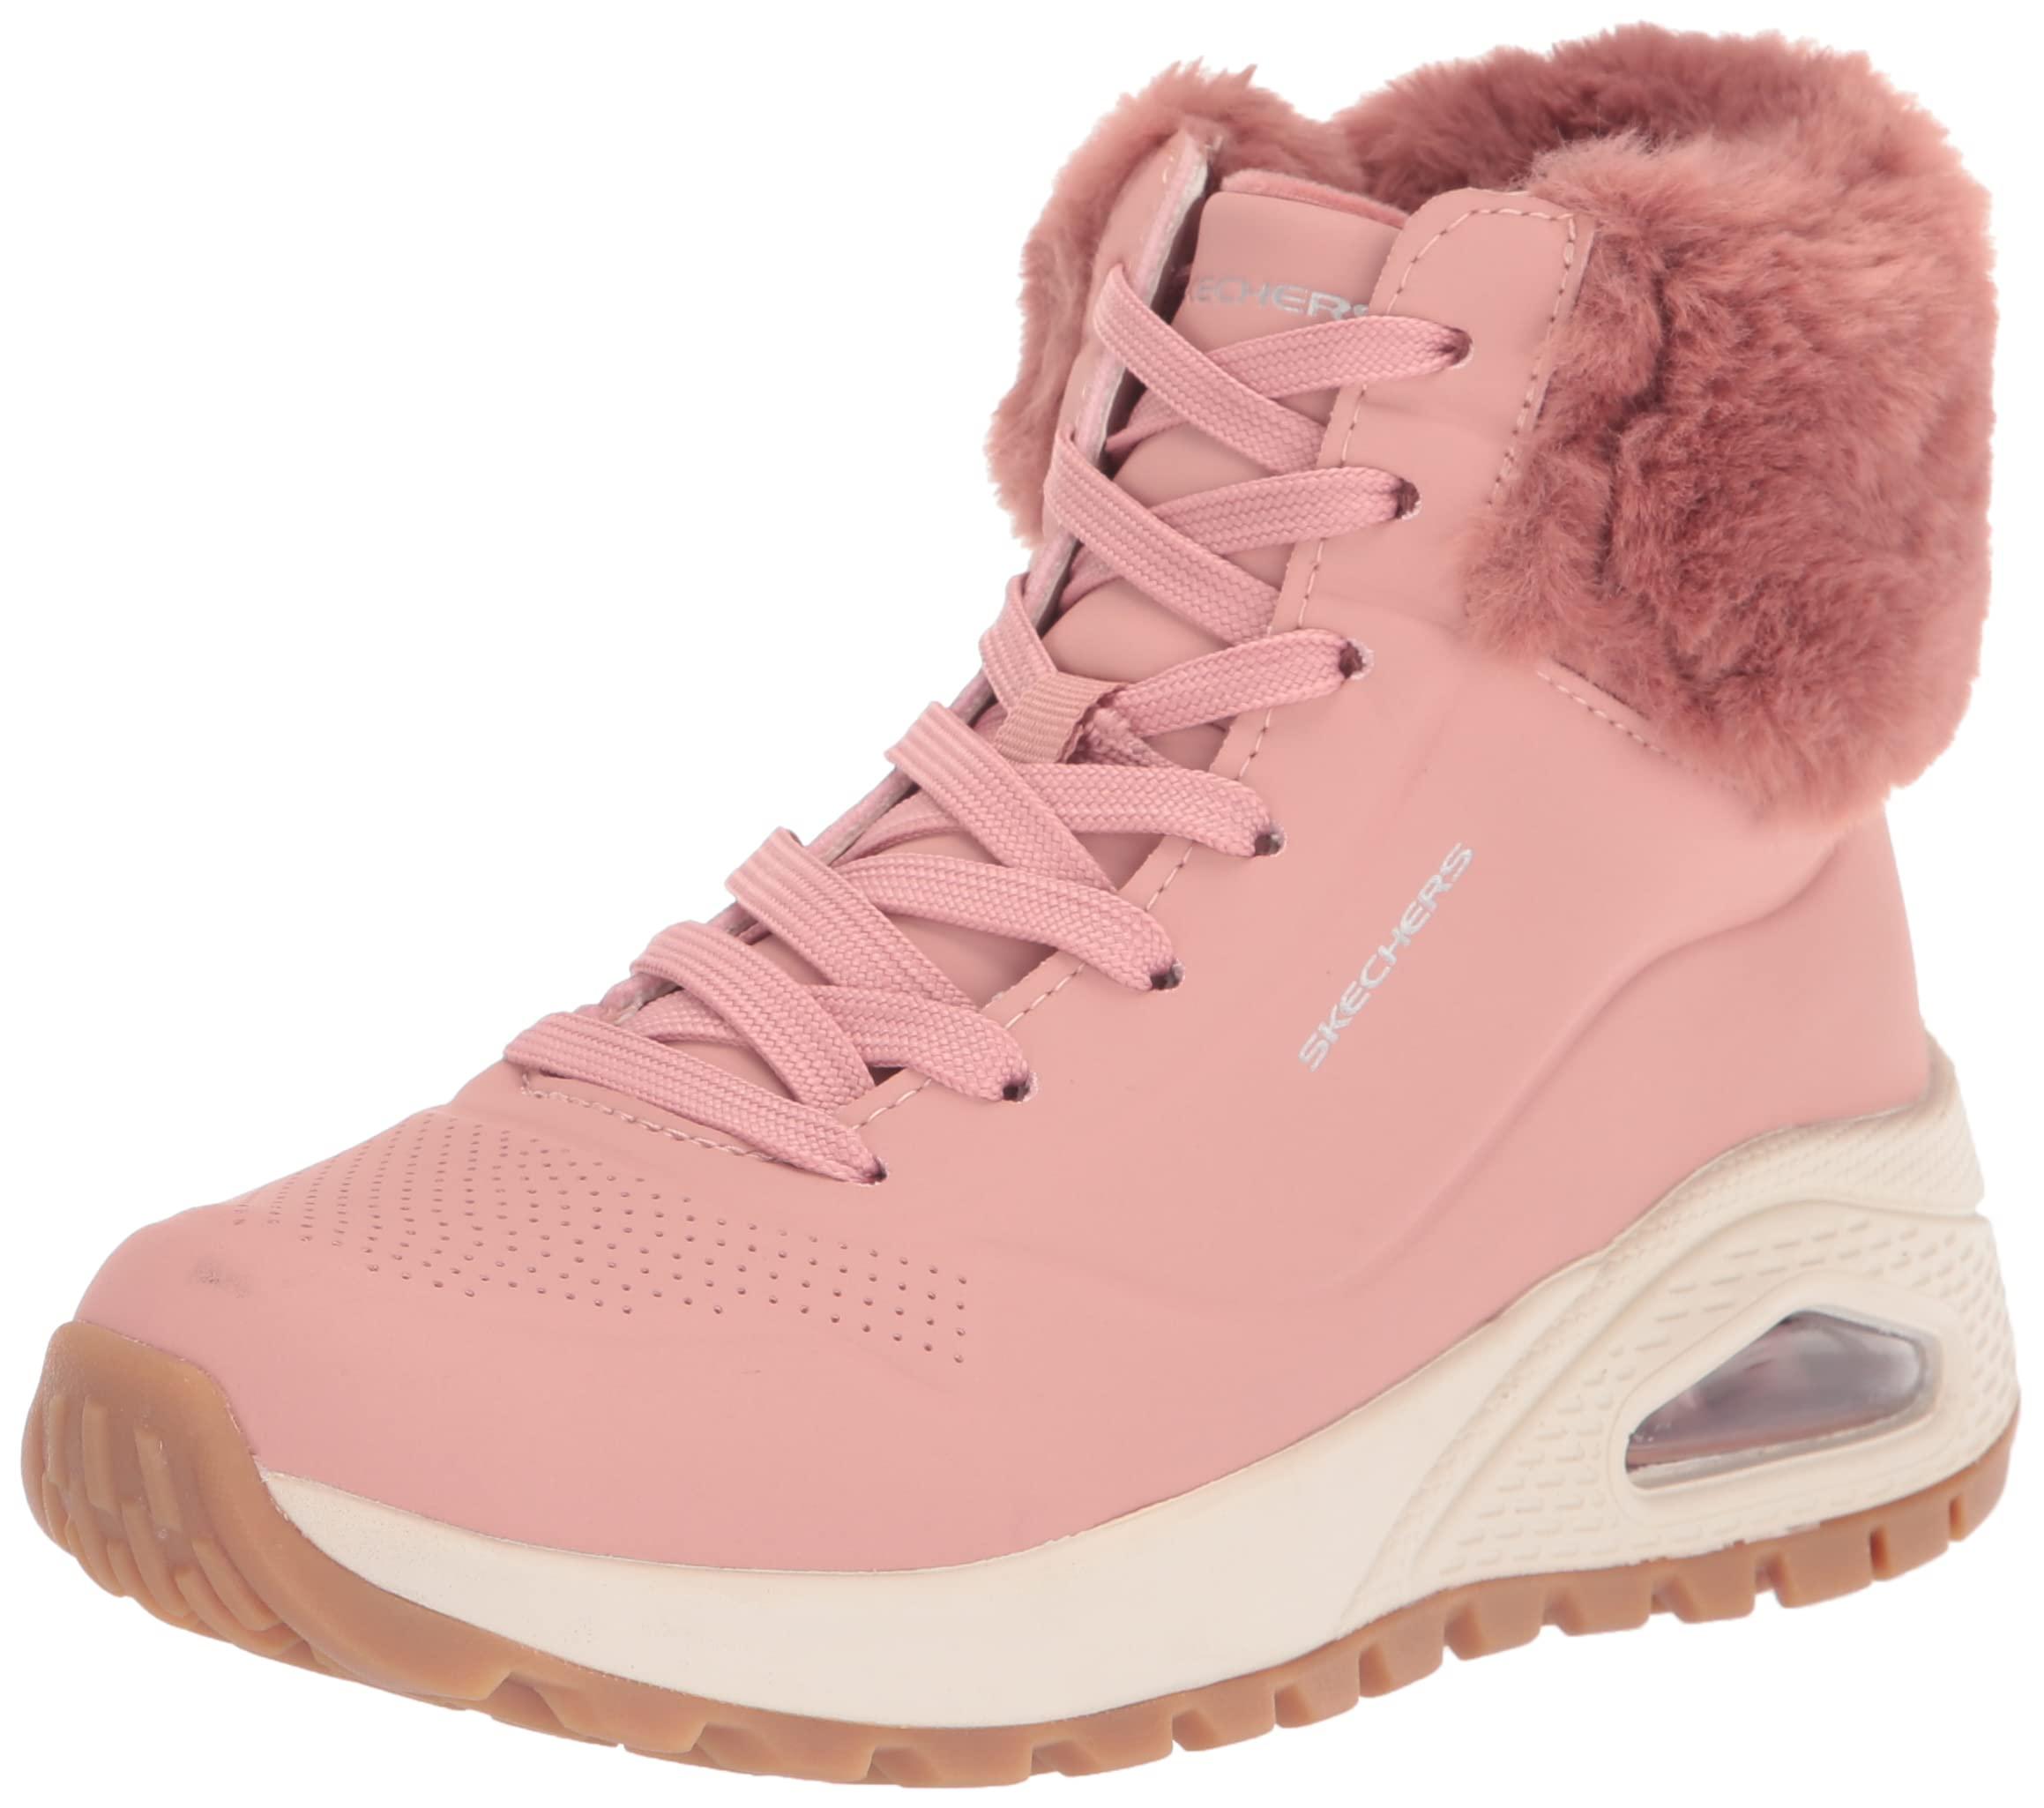 Skechers Women's Uno Rugged Fall Air Sneaker Boot Red 6.5